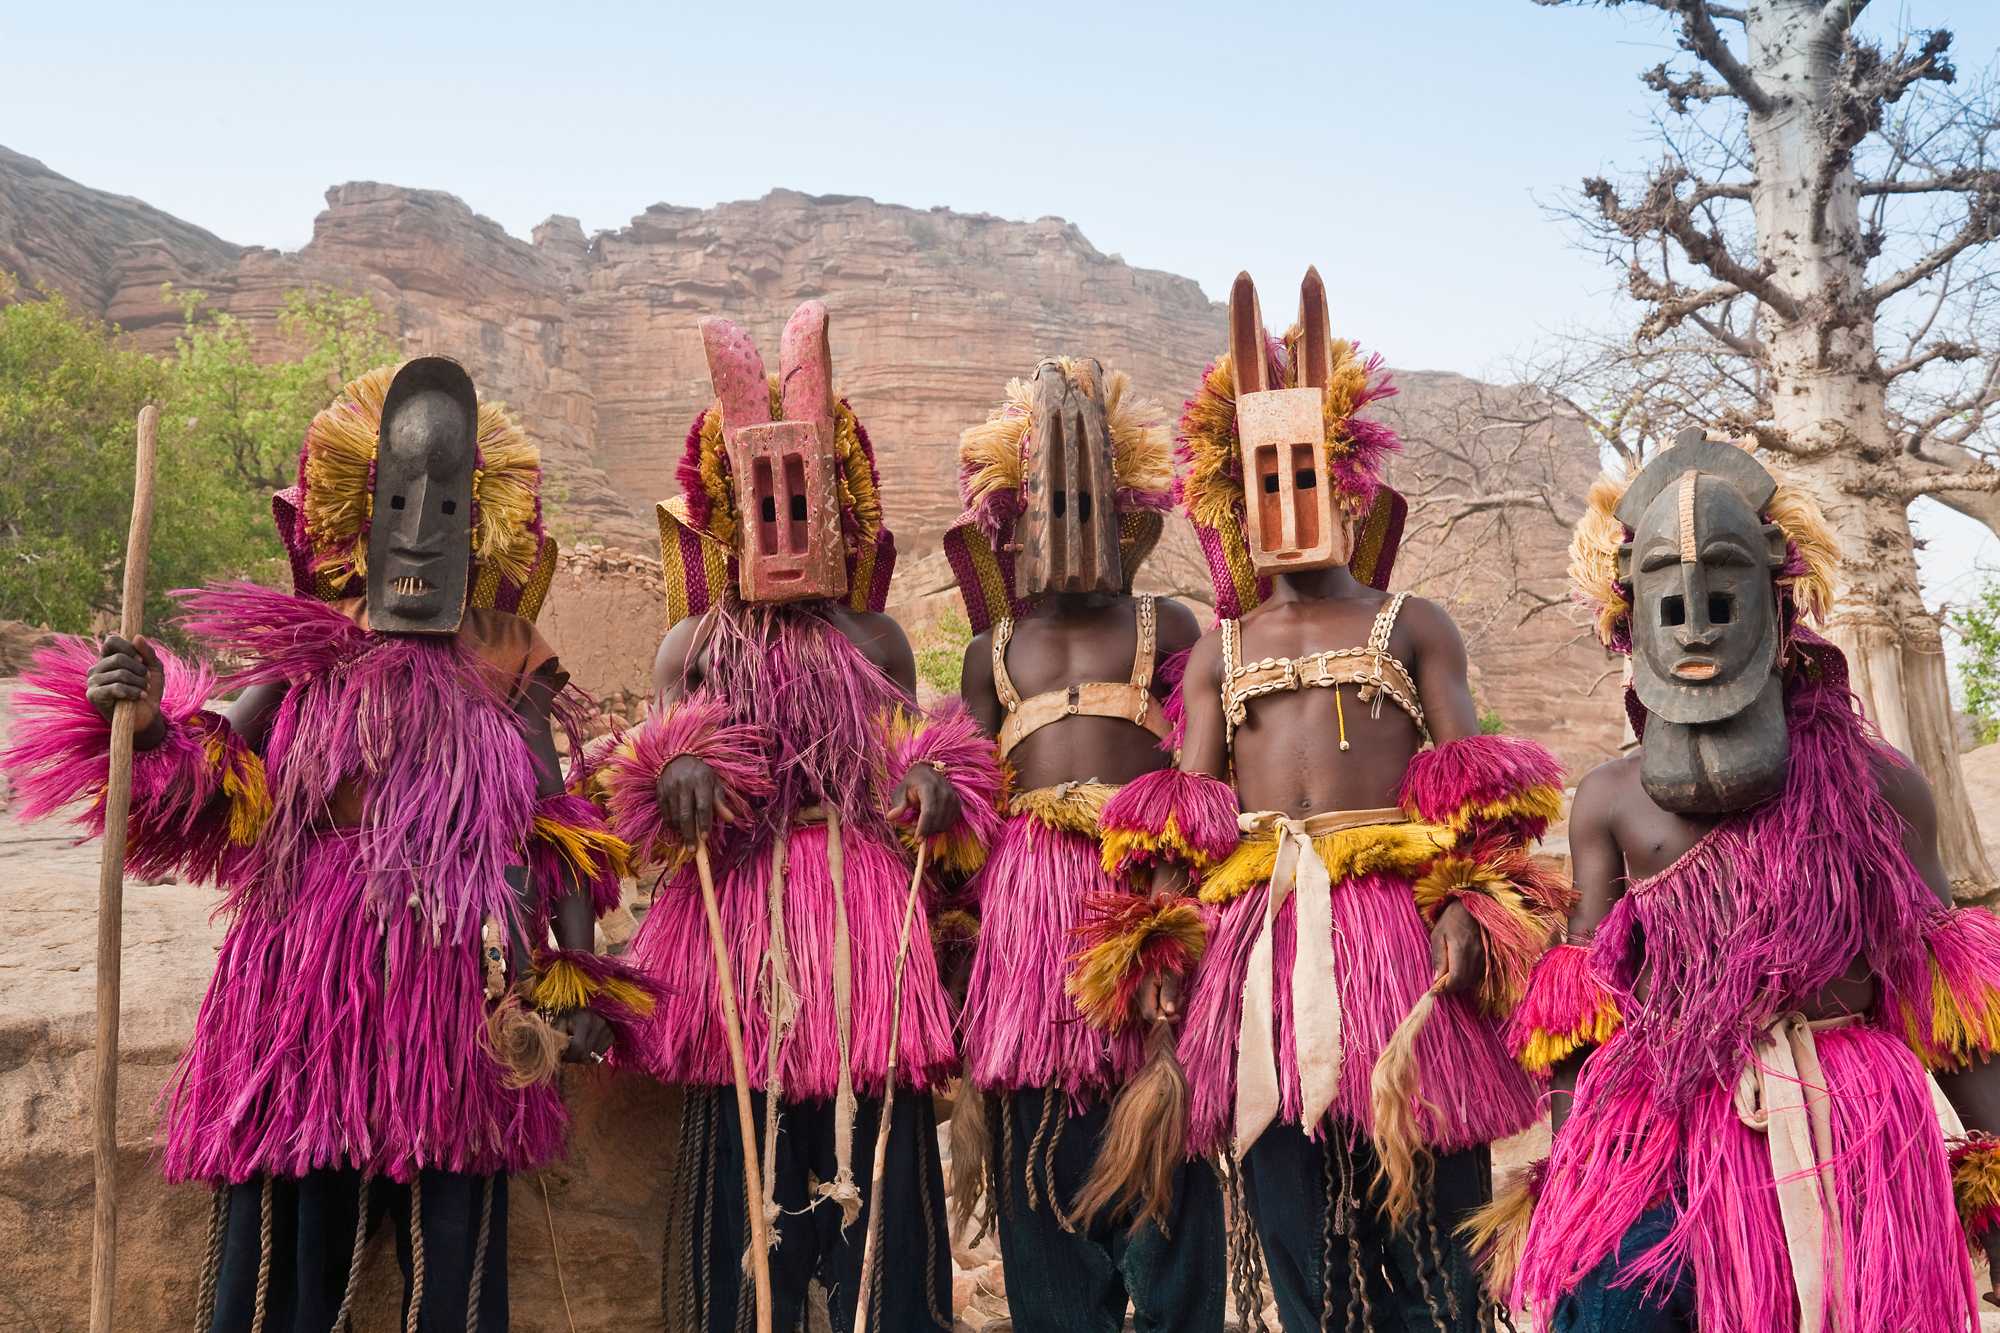 5 dancers stand next two each other. Each has a ceremonial mask and outfit.